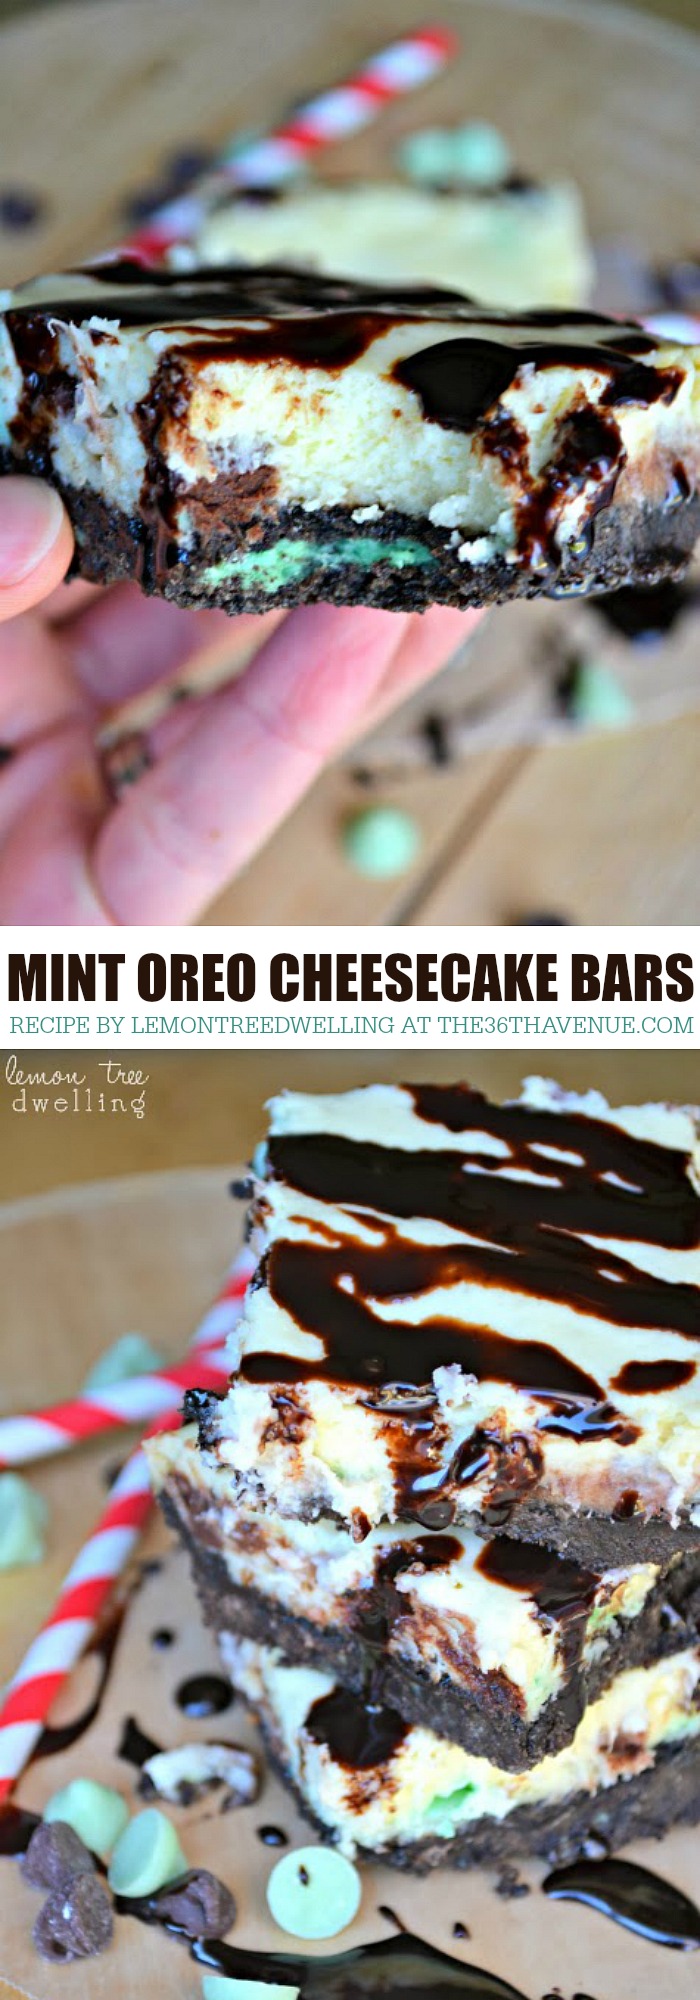 Easy Recipe - These Mint Oreo Cheesecake Bars are DELICIOUS! When it comes to baking, you can't go wrong with chocolate and mint! These bars make the perfect neighbor Christmas Gifts! PIN IT NOW and make them later! 